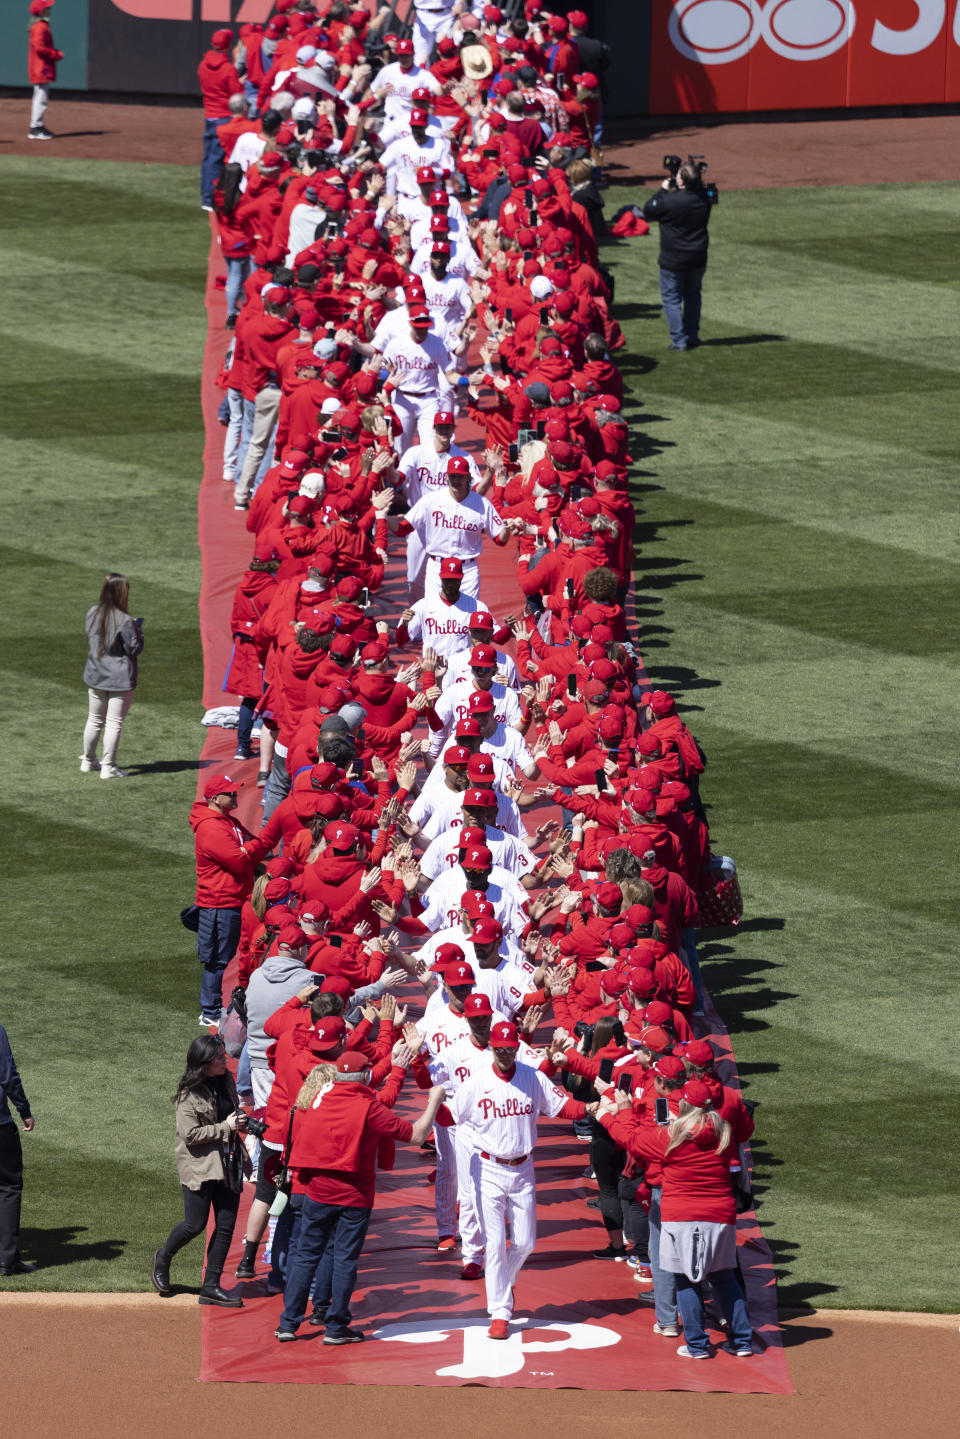 The Philadelphia Phillies take the field before a home opener baseball game against the Oakland Athletics, Friday, April 8, 2022, in Philadelphia. (AP Photo/Laurence Kesterson)